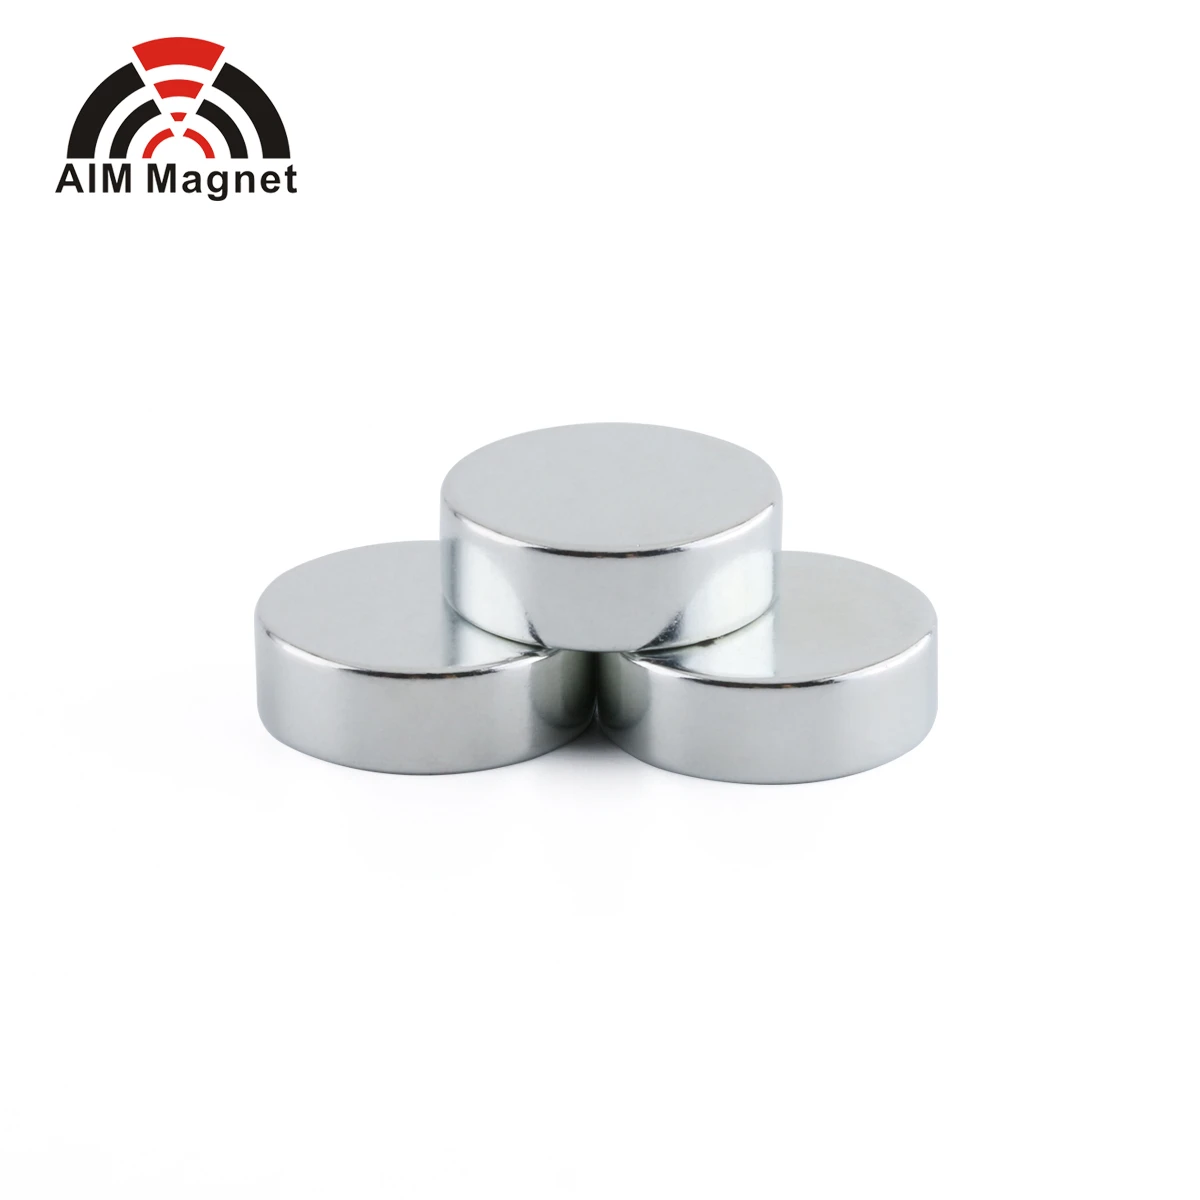 Hot selling N52 NdFeB Magnet with good price Strong Magnets